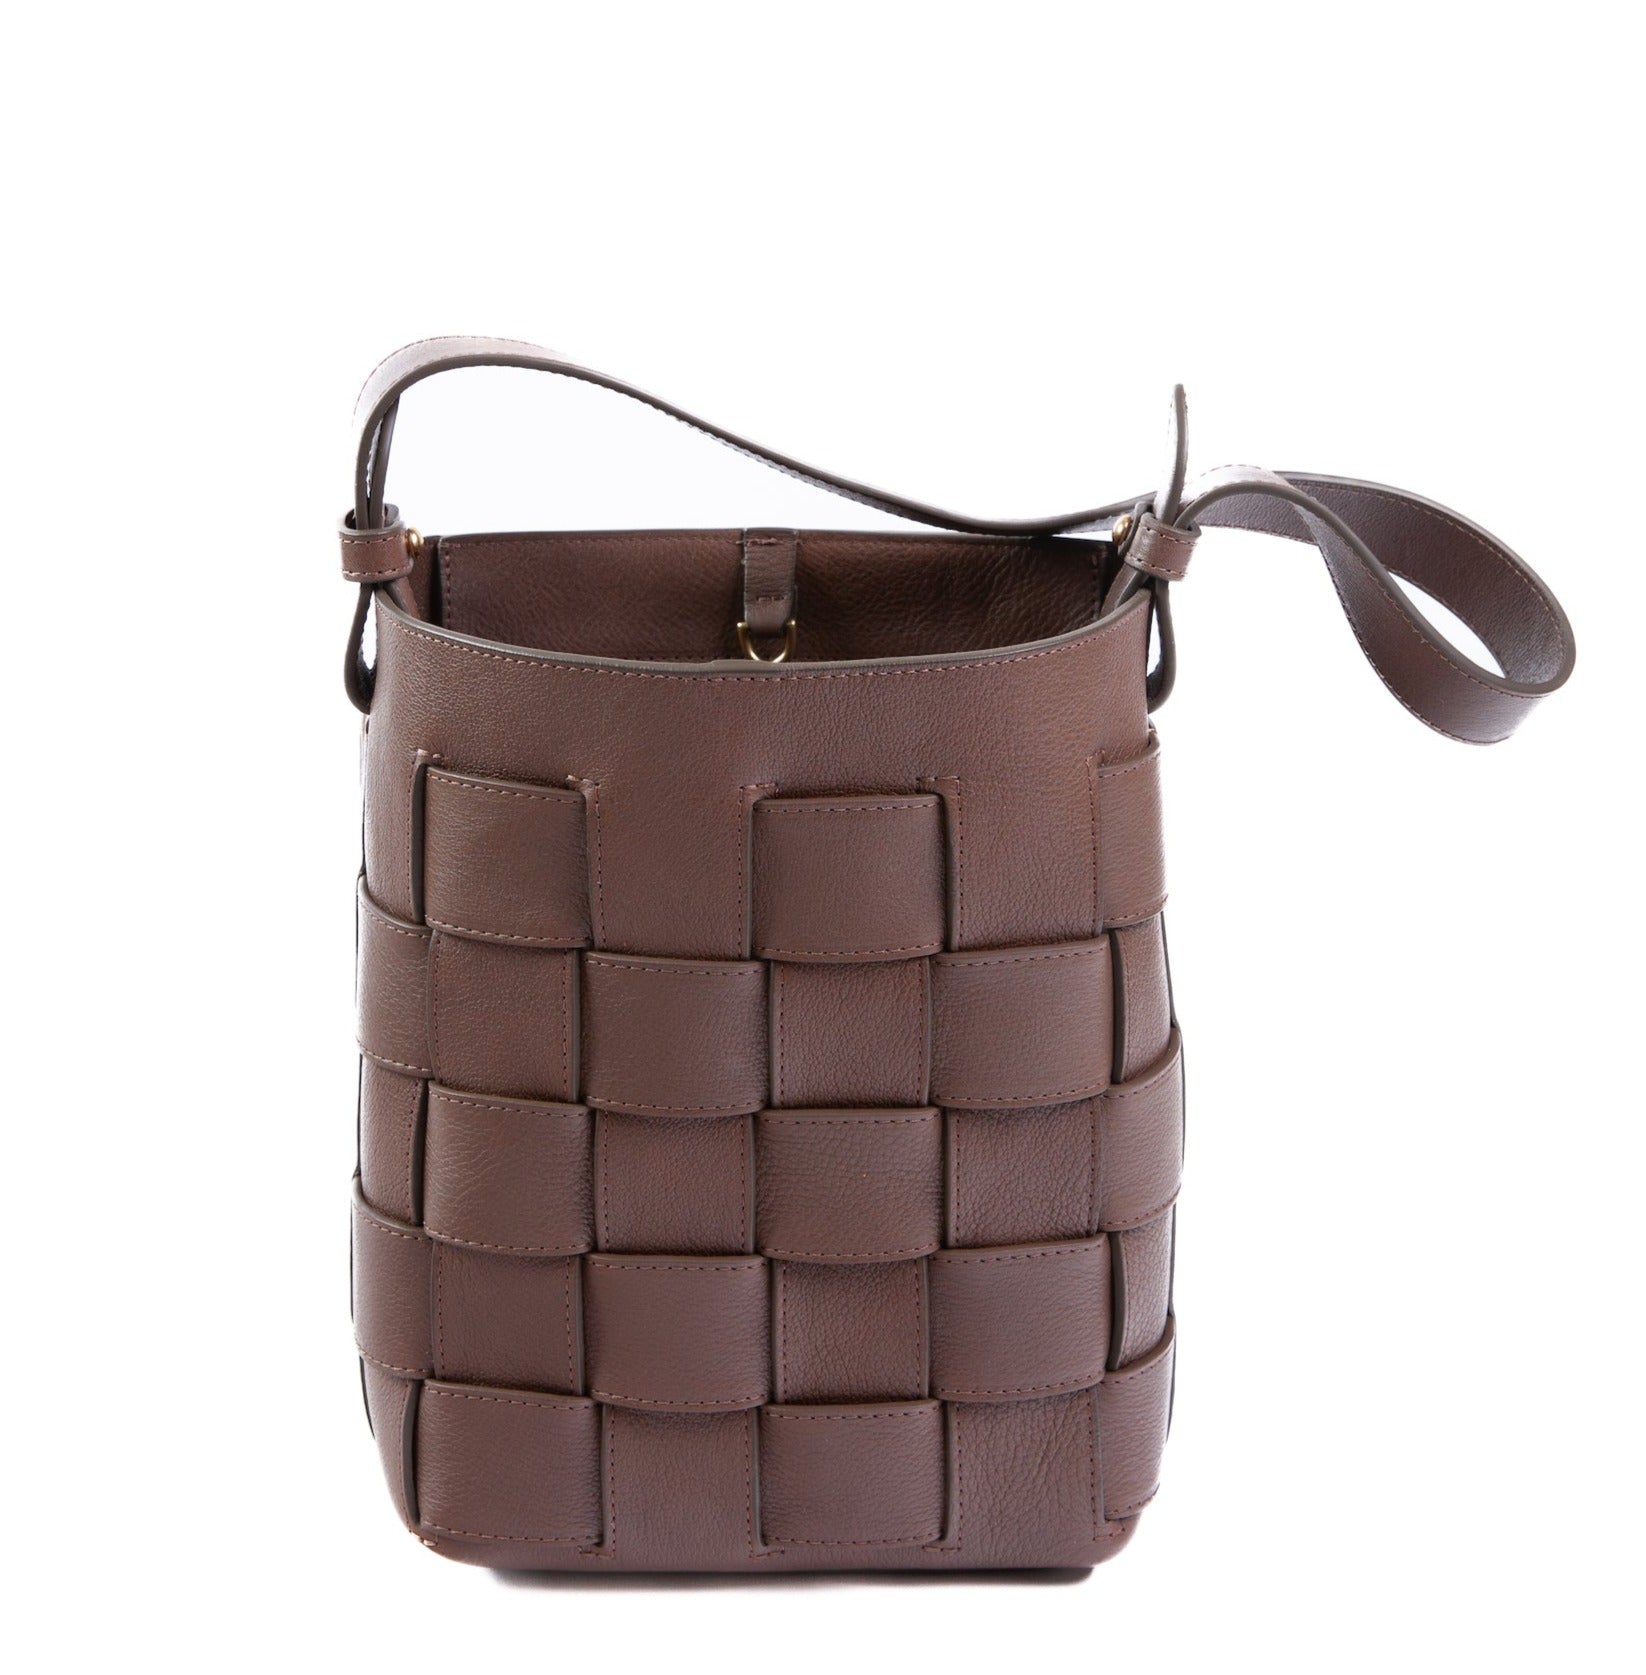 Mini Woven Leather Bucket Shoulder Bag Clay